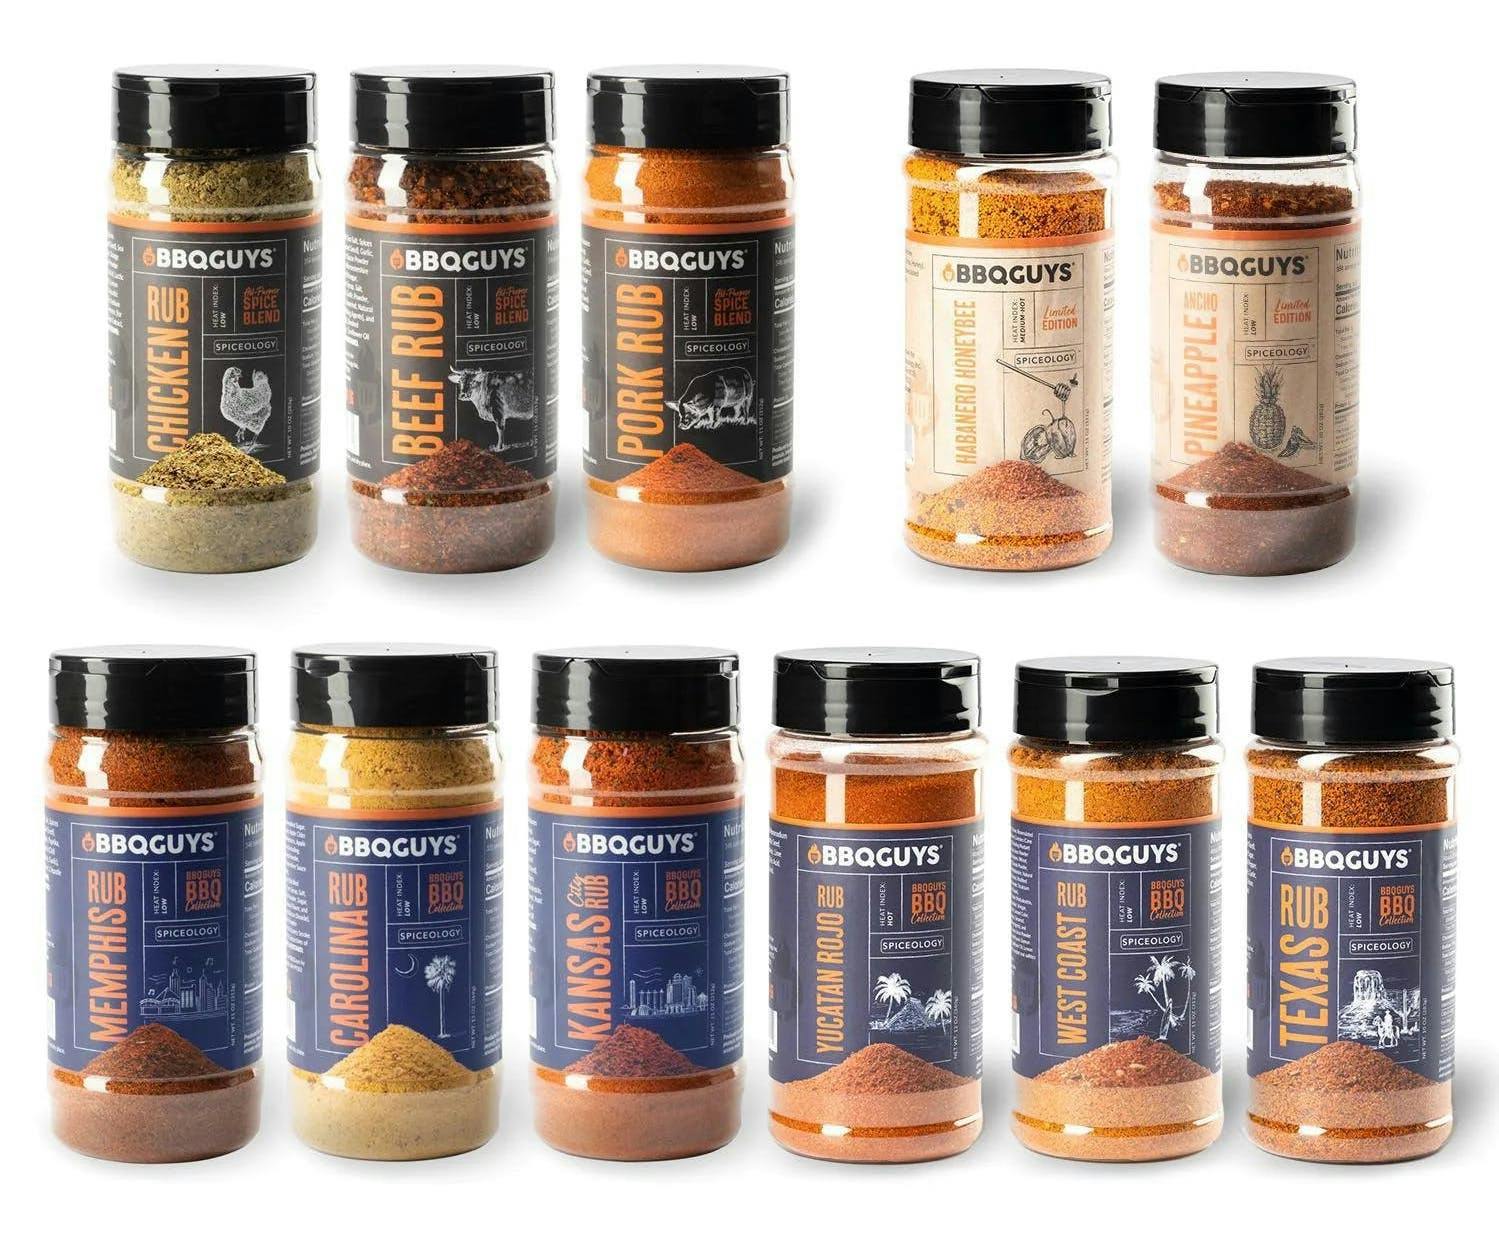 Product image of the BBQ Guys x Spiceology Complete Rub Collection. 